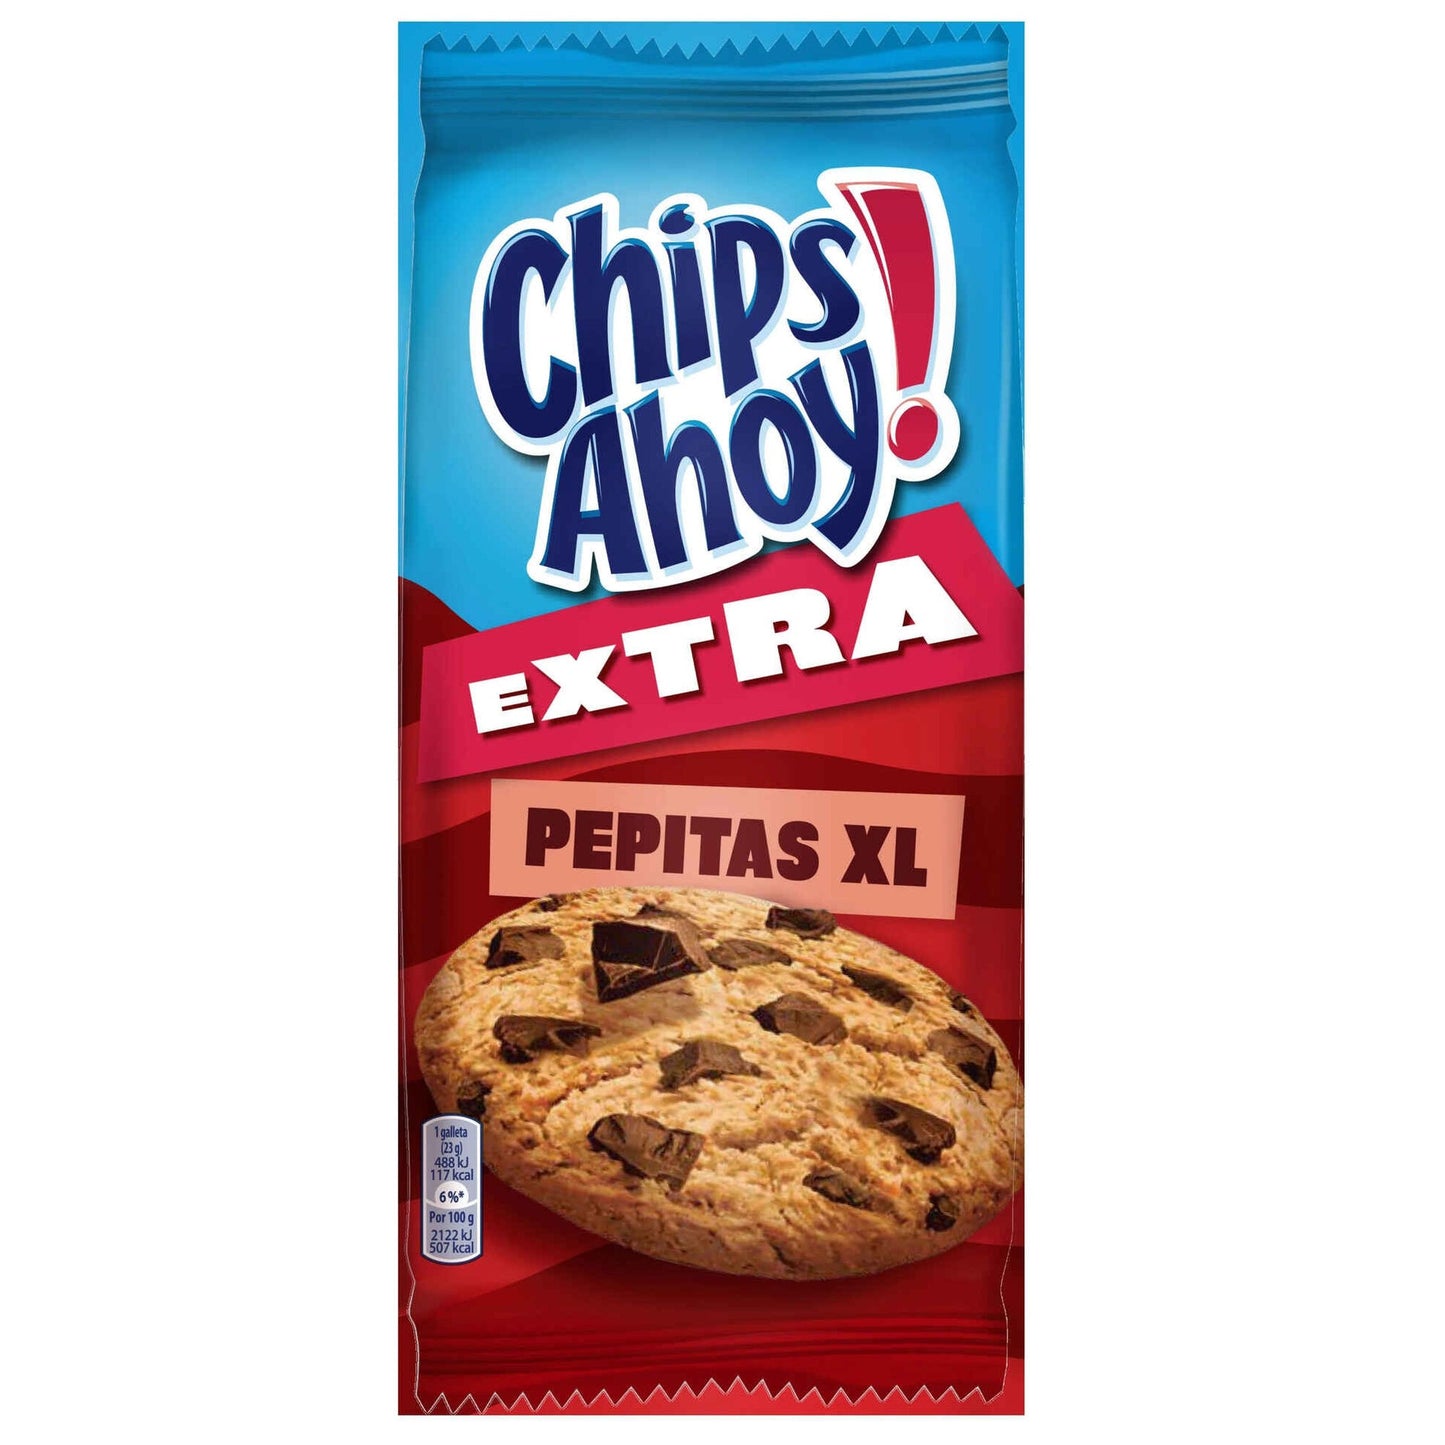 Extra XL Cookies Chips Ahoy 184g